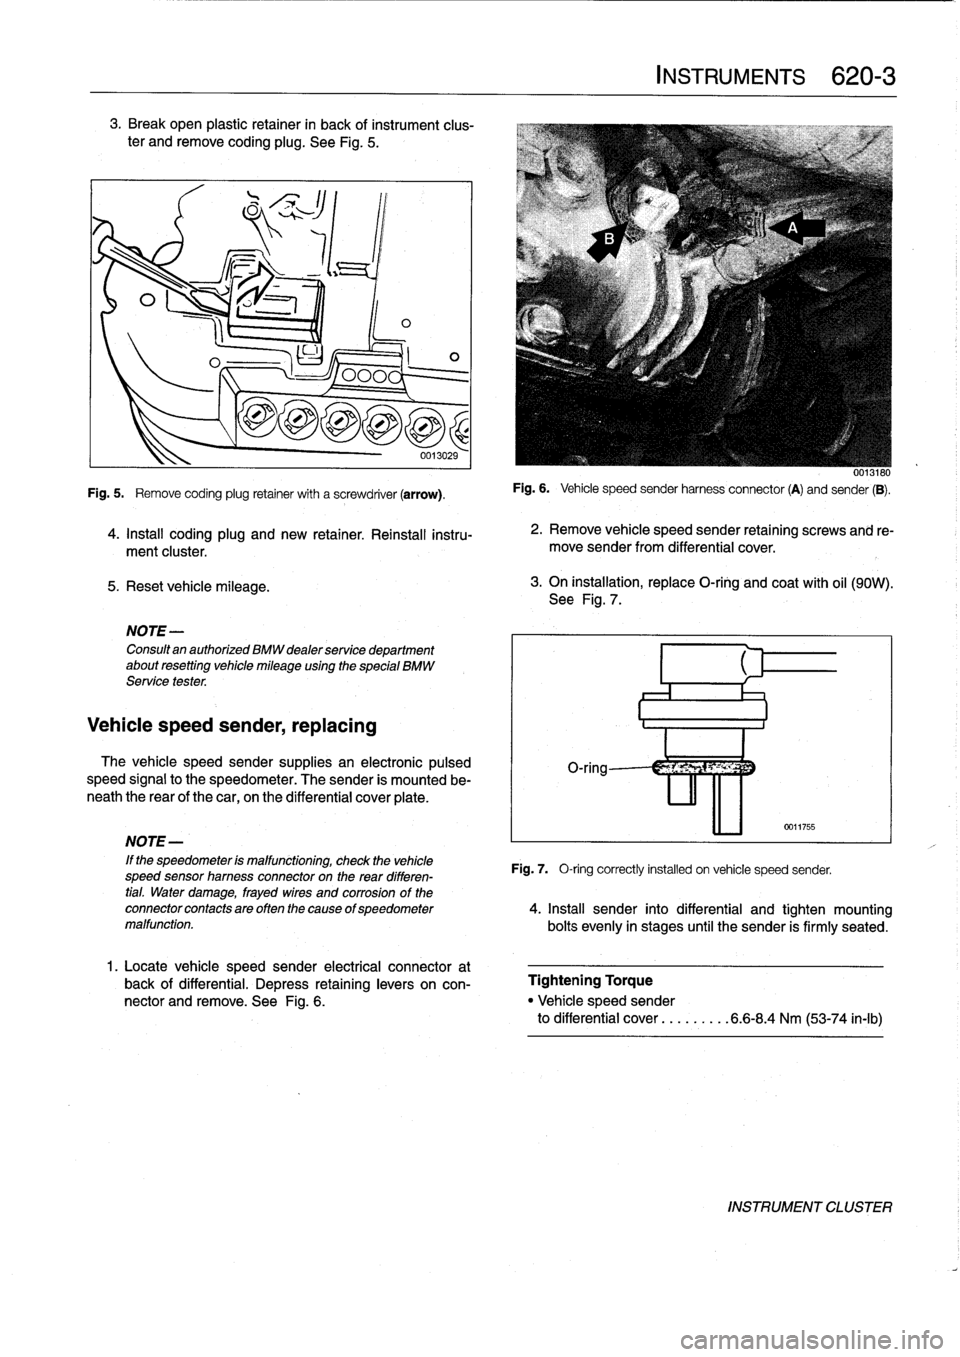 BMW 325i 1993 E36 Workshop Manual 3
.
Break
open
plastic
retainer
in
back
of
instrument
clus-
ter
andremove
coding
plug
.
See
Fig
.
5
.

5
.
Reset
vehicle
mileage
.

1
ILO

NOTE-

Consultan
authorized
BMW
dealer
service
department
abo